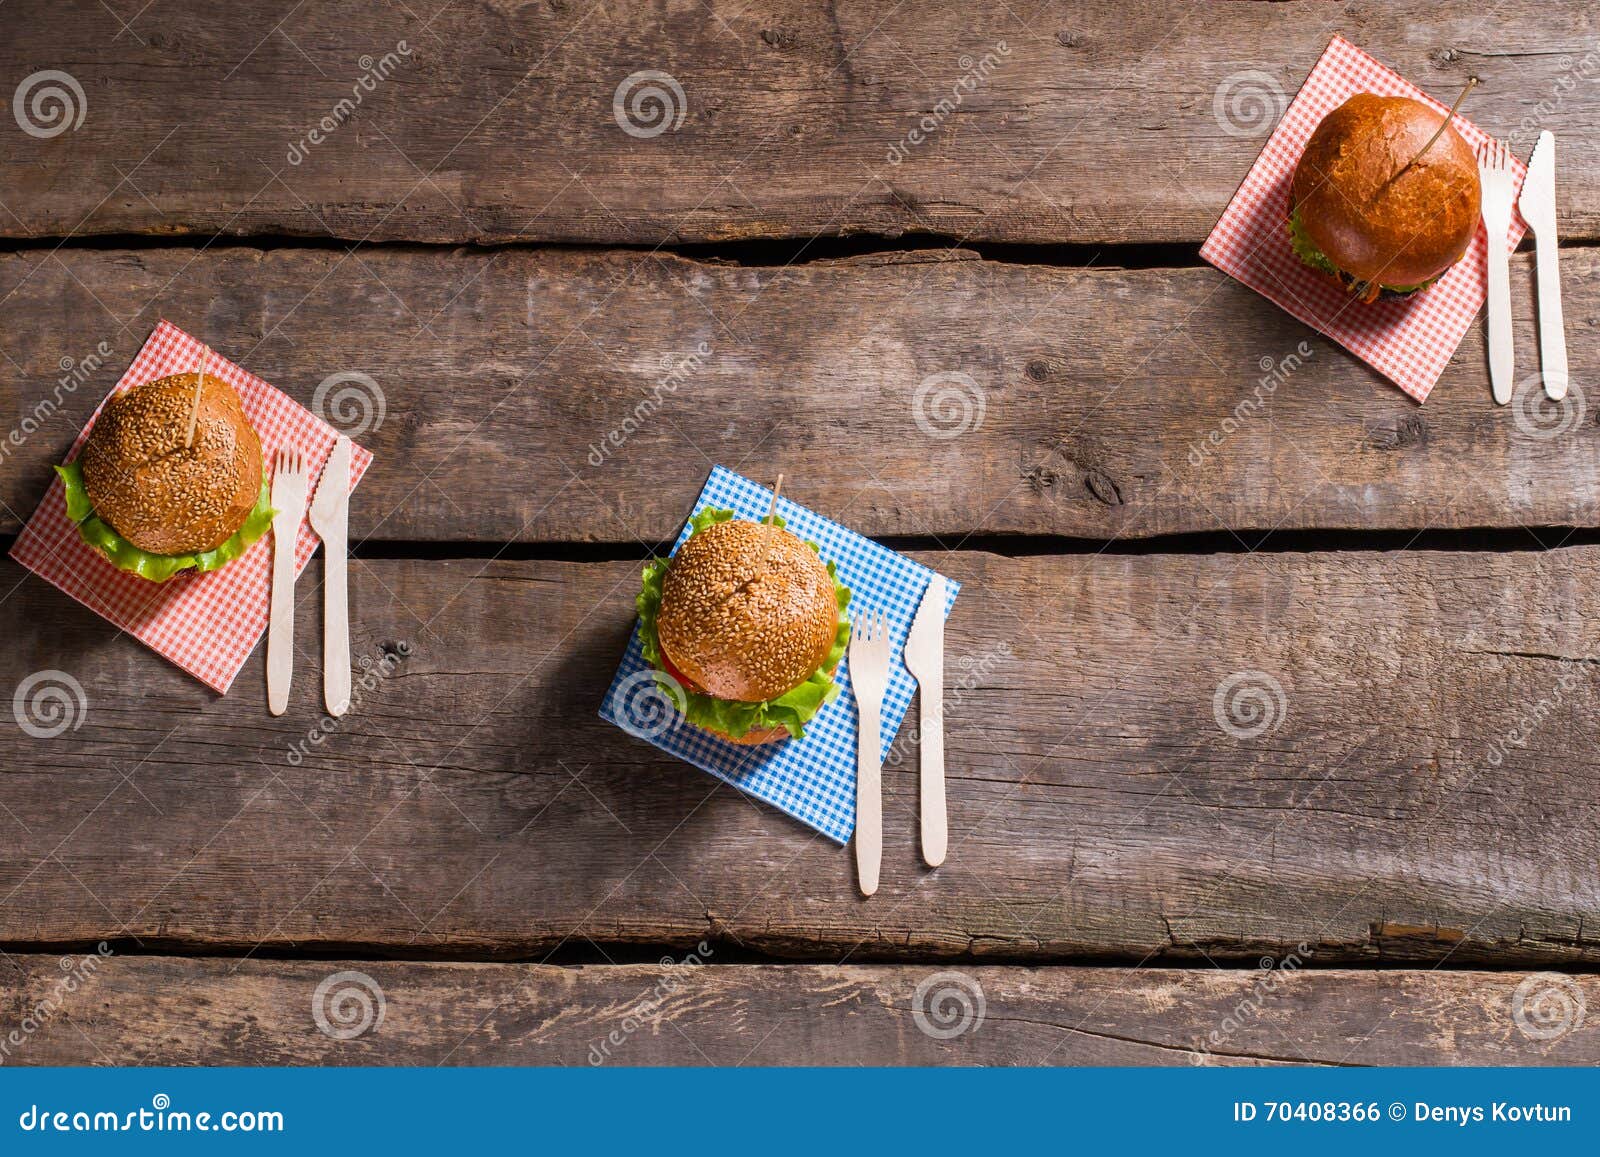 Burgers on Sticks with Cutlery. Stock Photo - Image of beef, diner ...